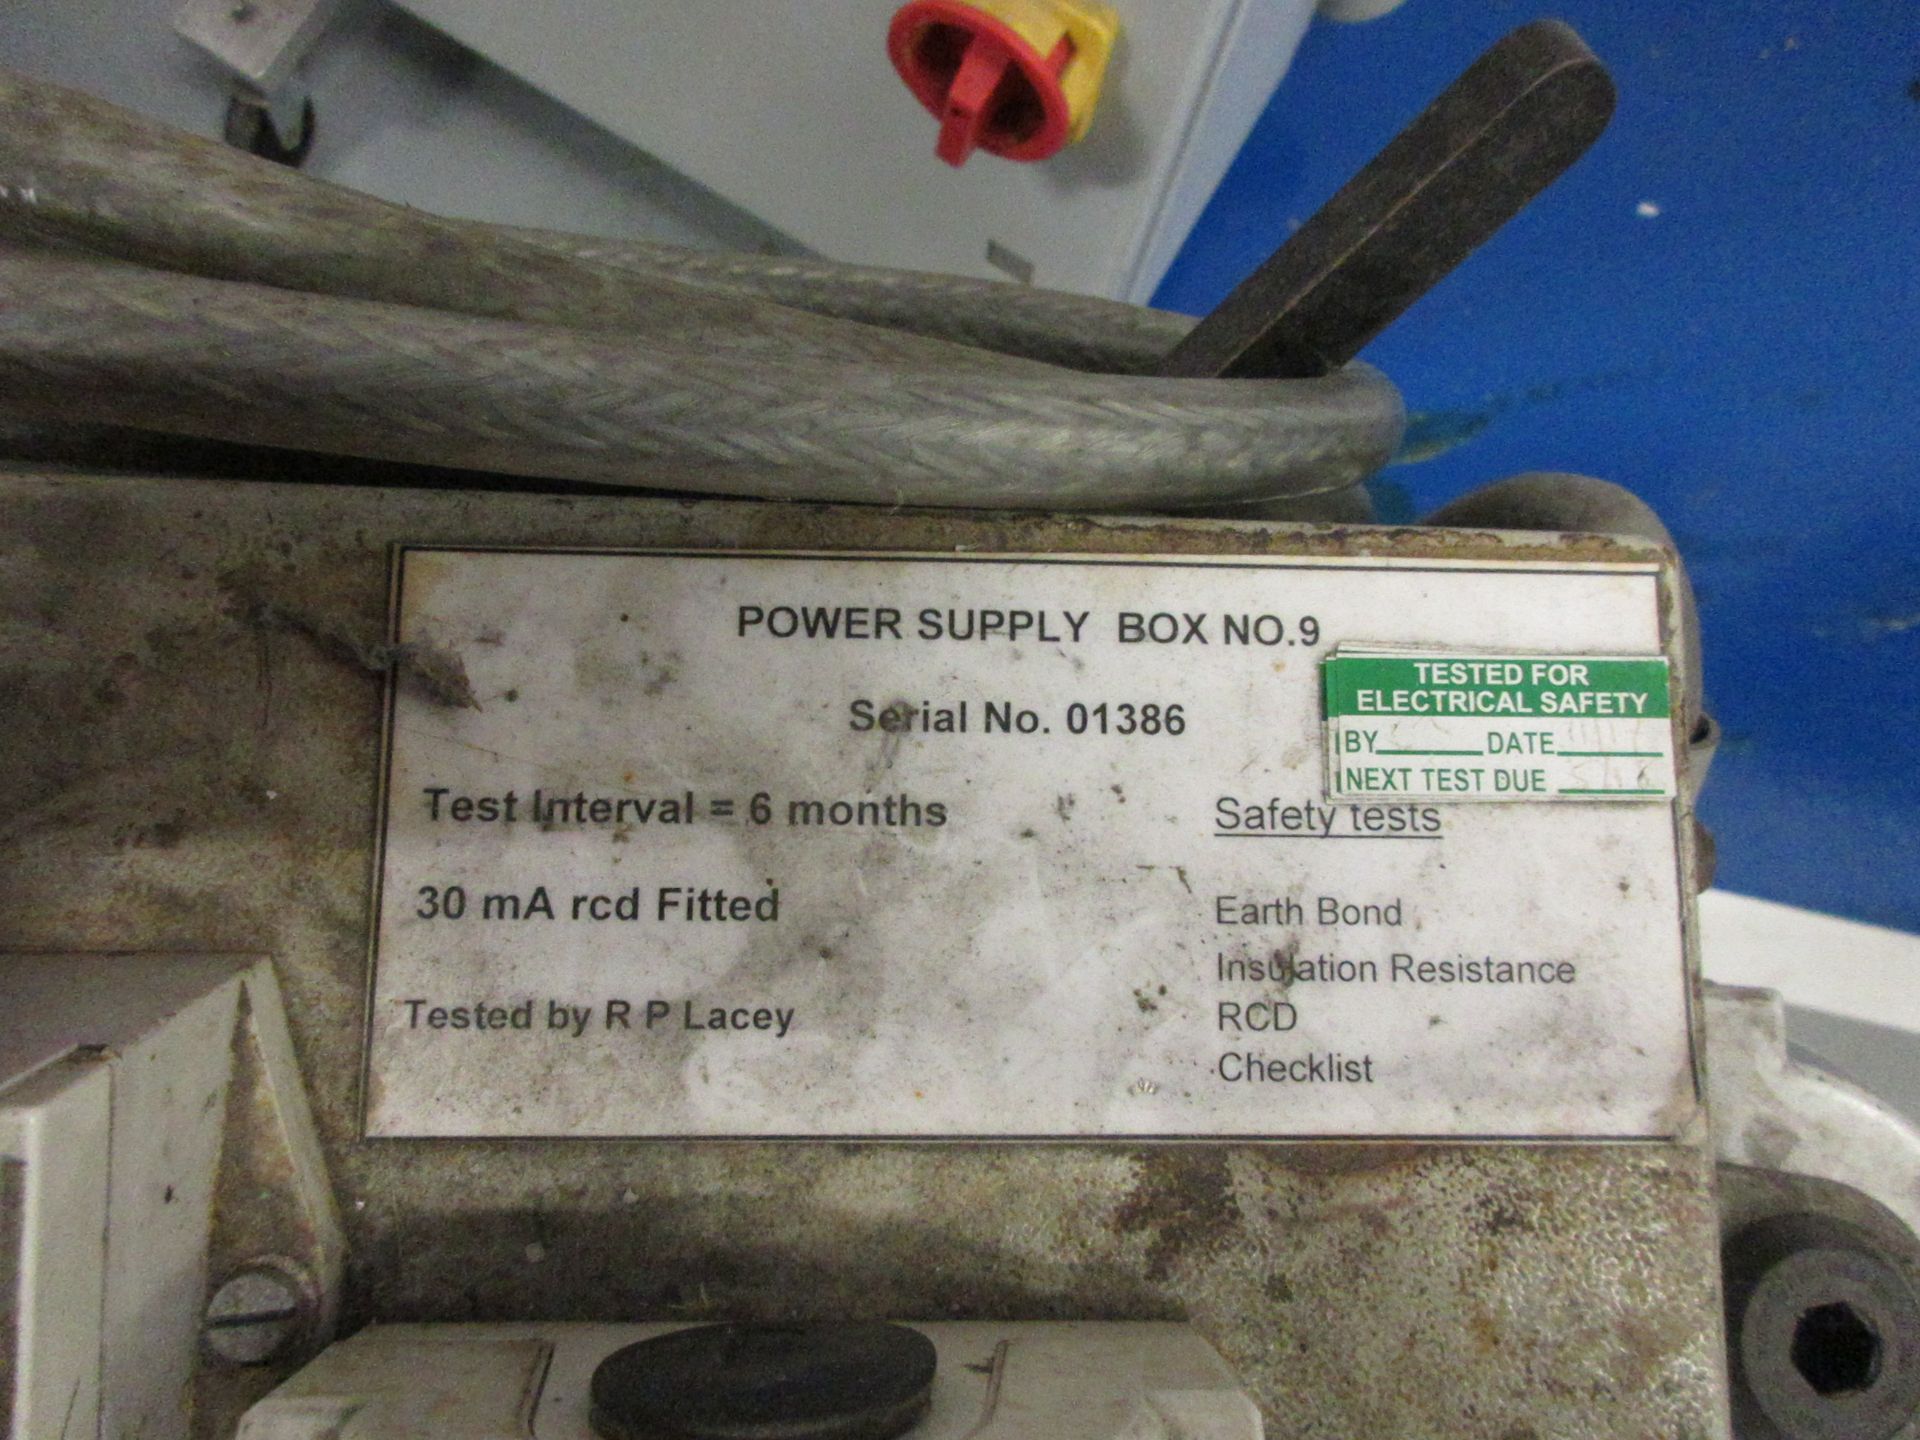 Mobile power supply unit (ref. box no. 13), 30 MA rcd fitted, serial no. 01386 - Image 3 of 5